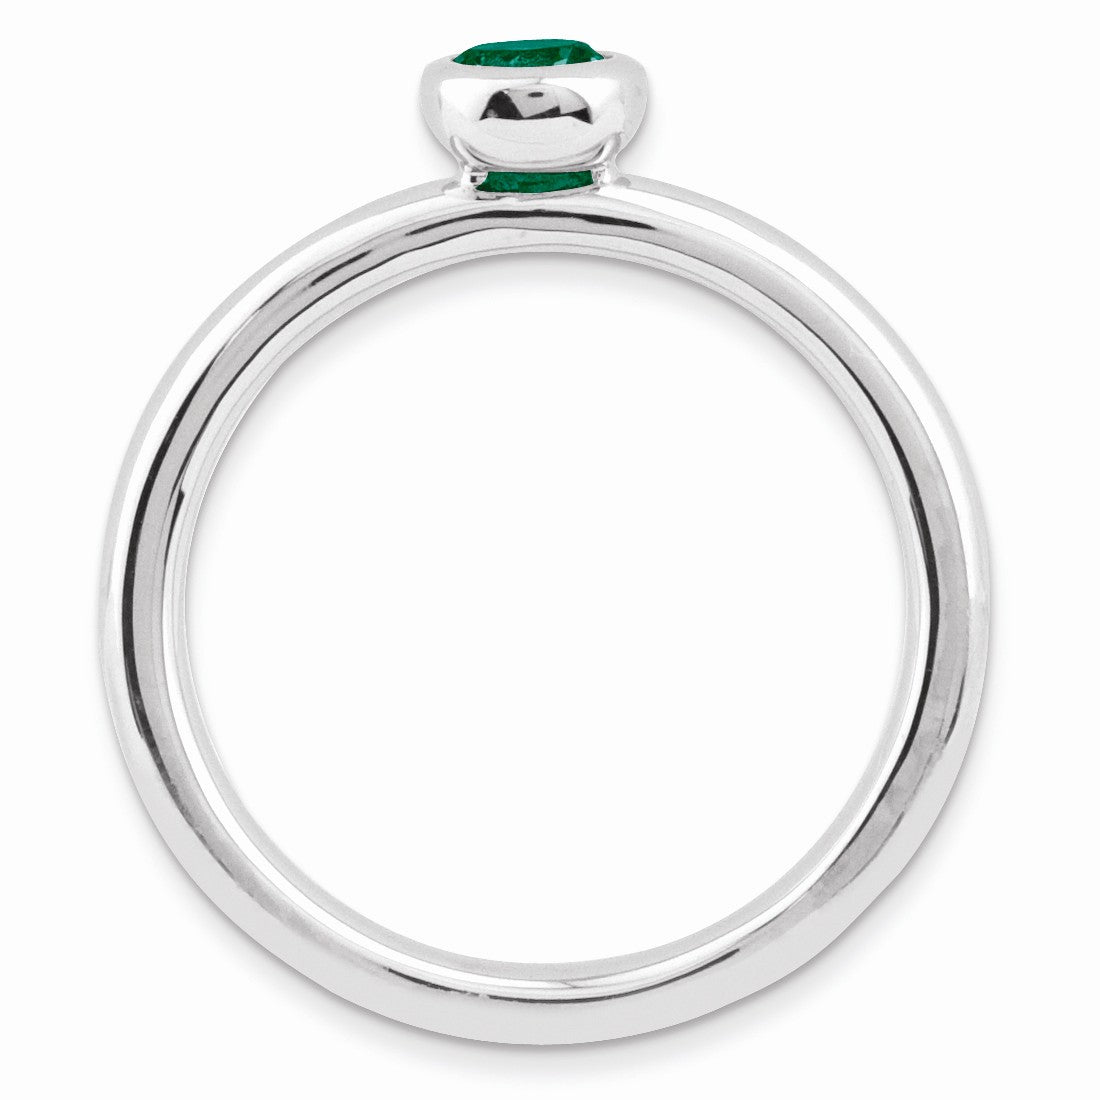 Alternate view of the Stackable Low Profile 4mm Created Emerald Silver Ring by The Black Bow Jewelry Co.